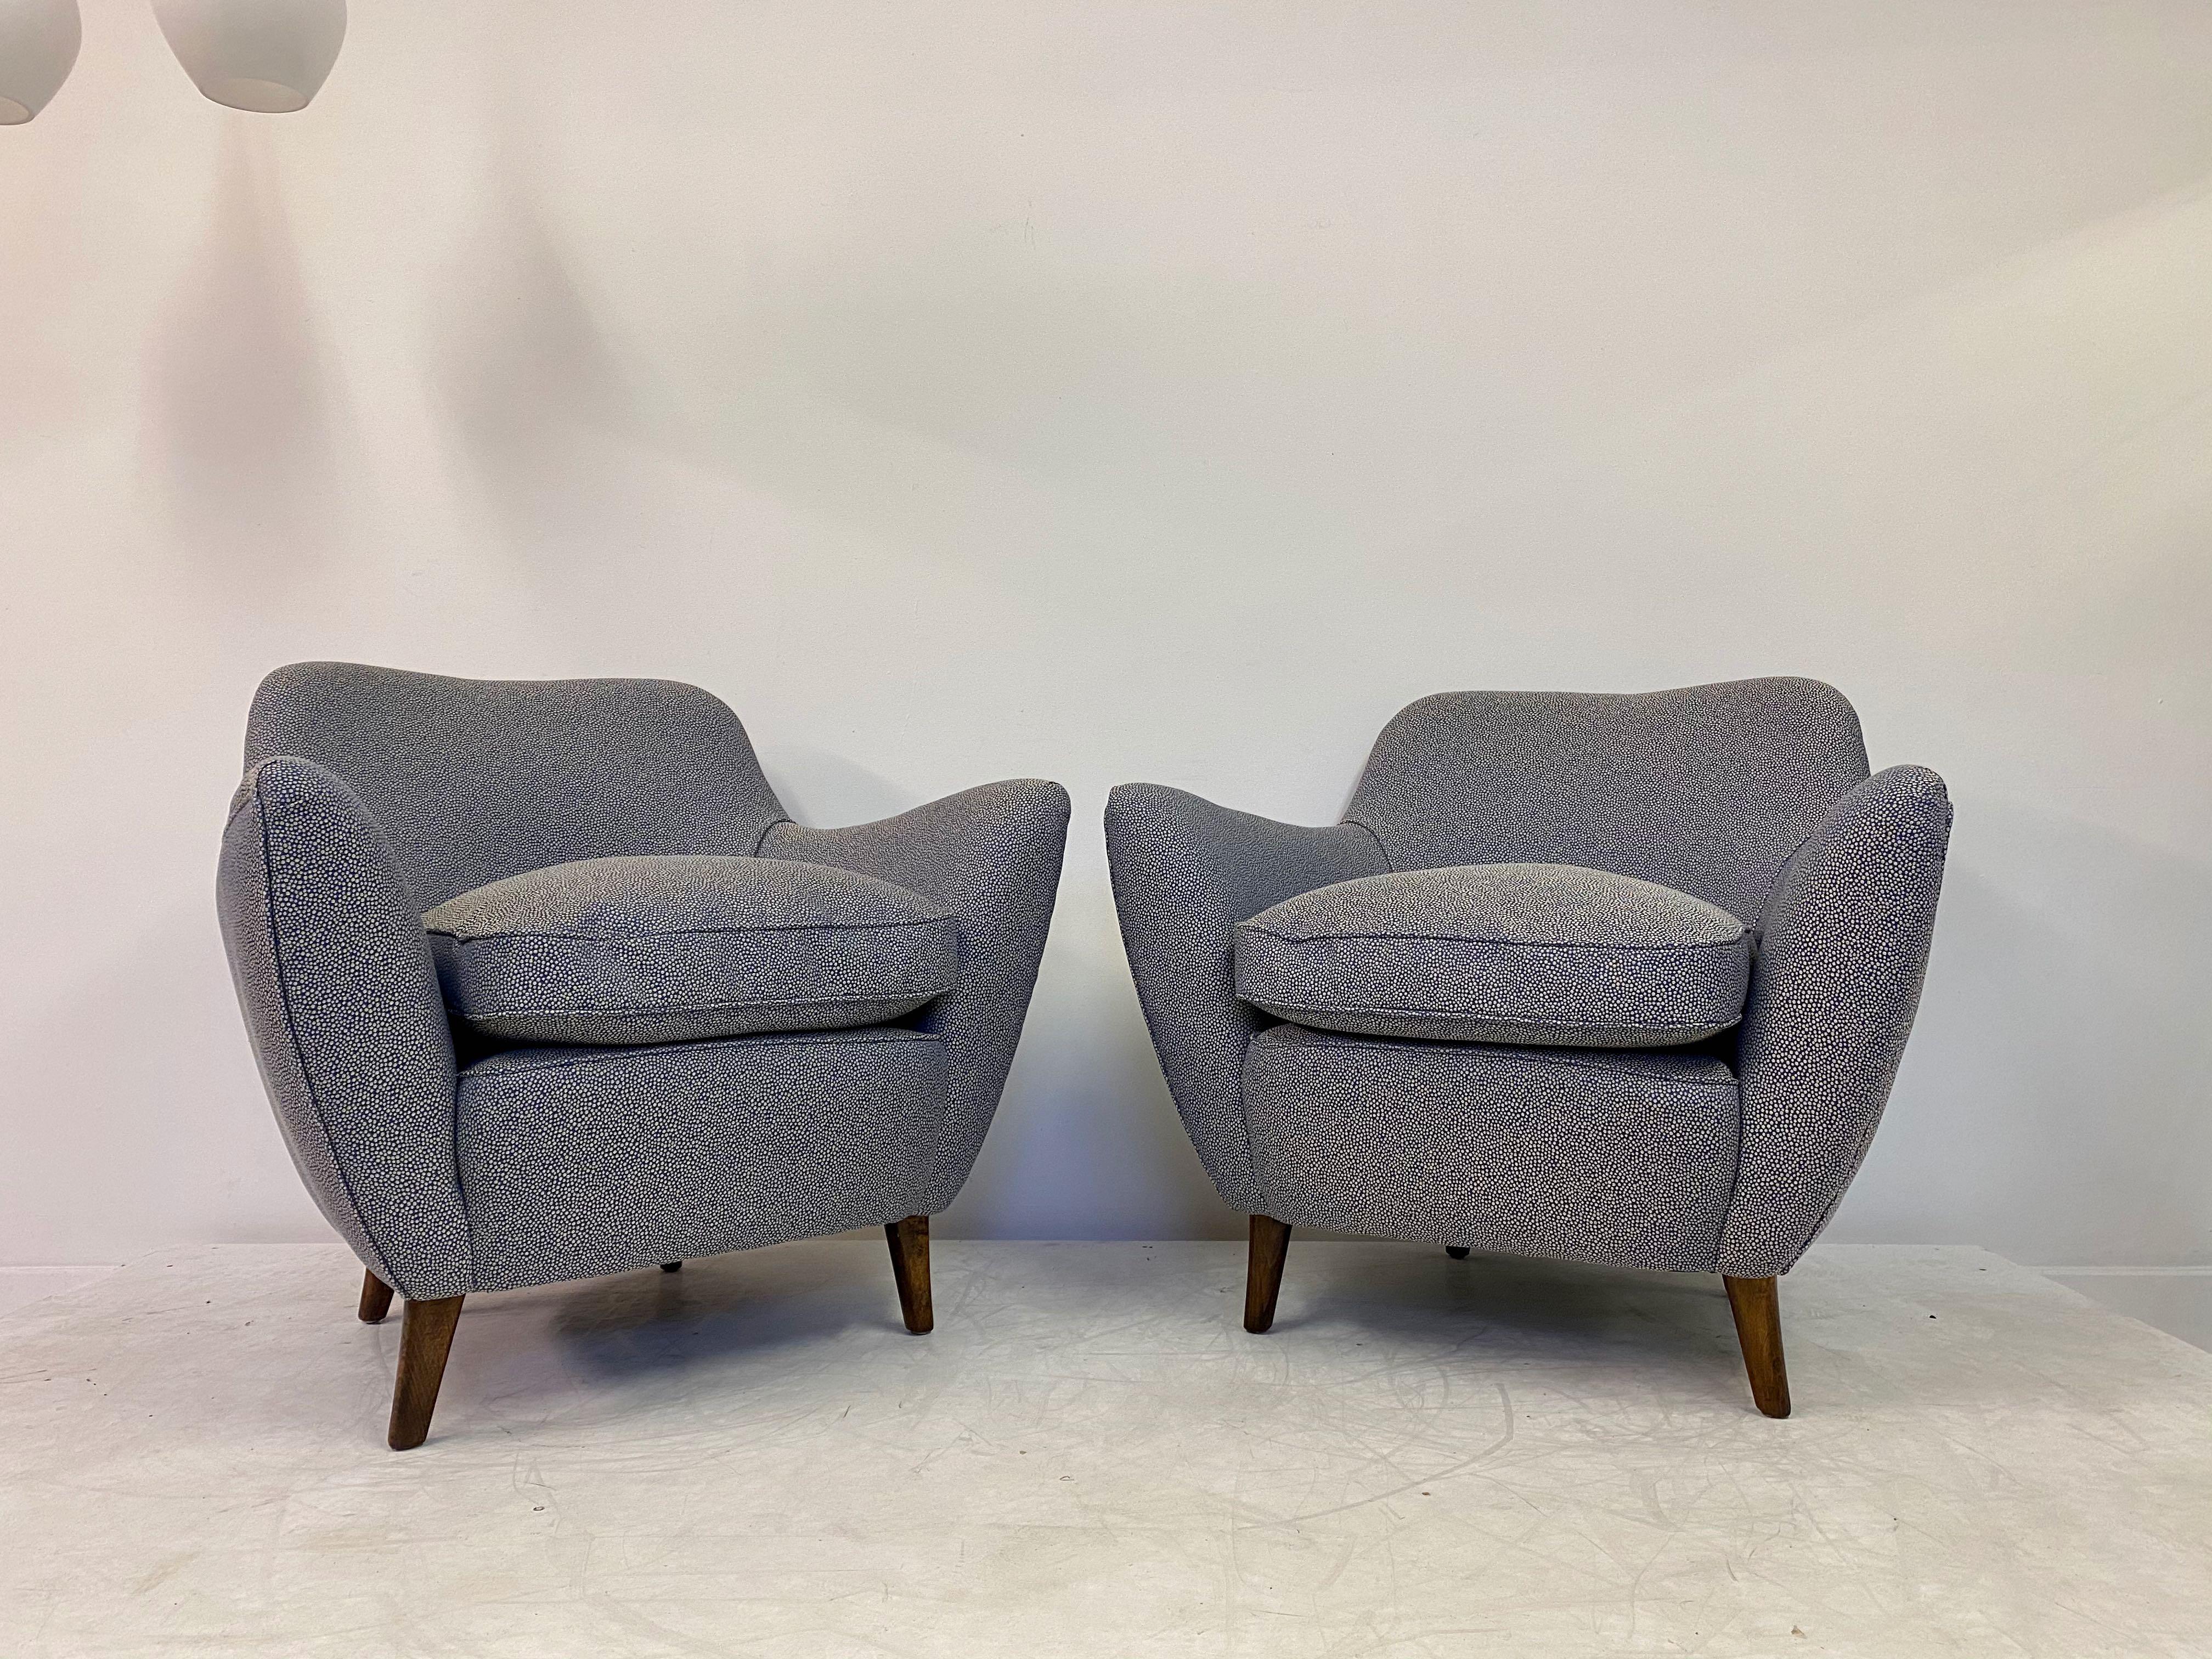 Midcentury Pair of 1950s Italian Armchairs in the Style of Guglielmo Veronesi In Good Condition For Sale In London, London